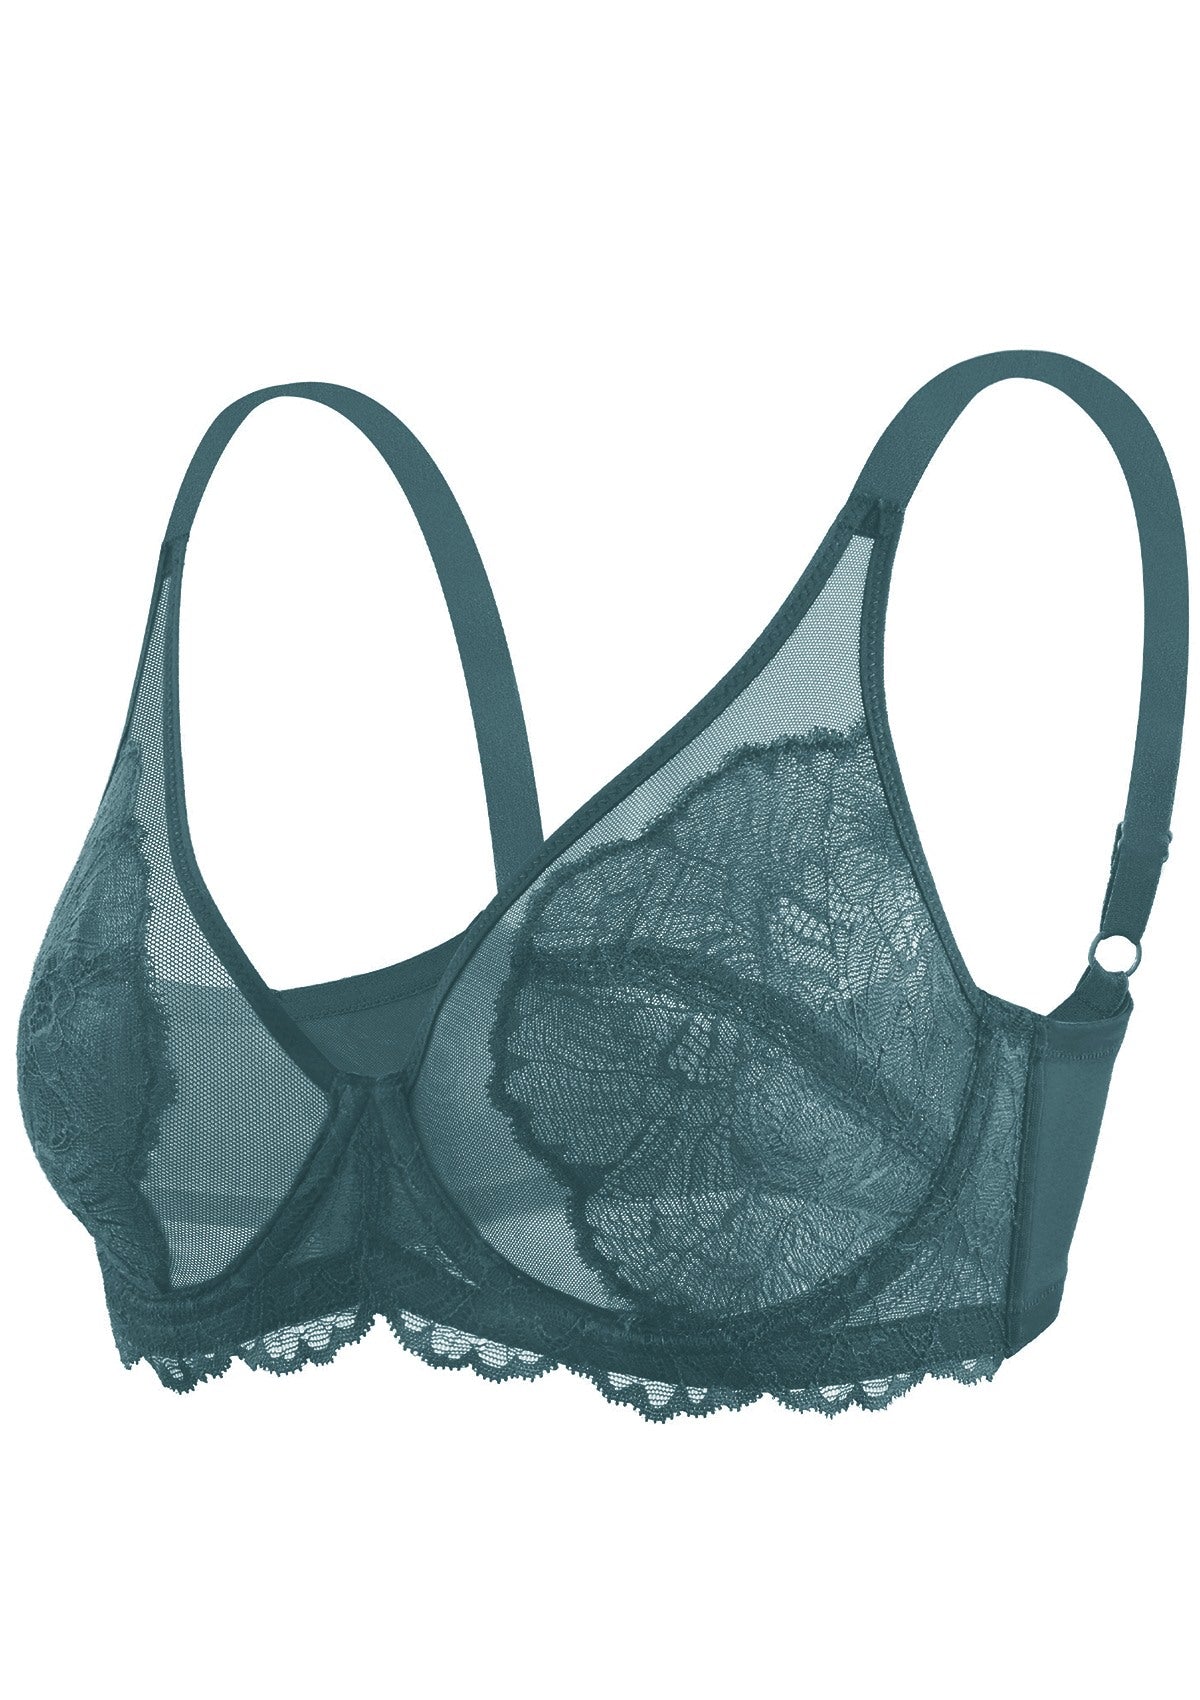 HSIA Blossom Full Figure See-Through Lace Bra For Side And Back Fat - Balsam Blue / 40 / G